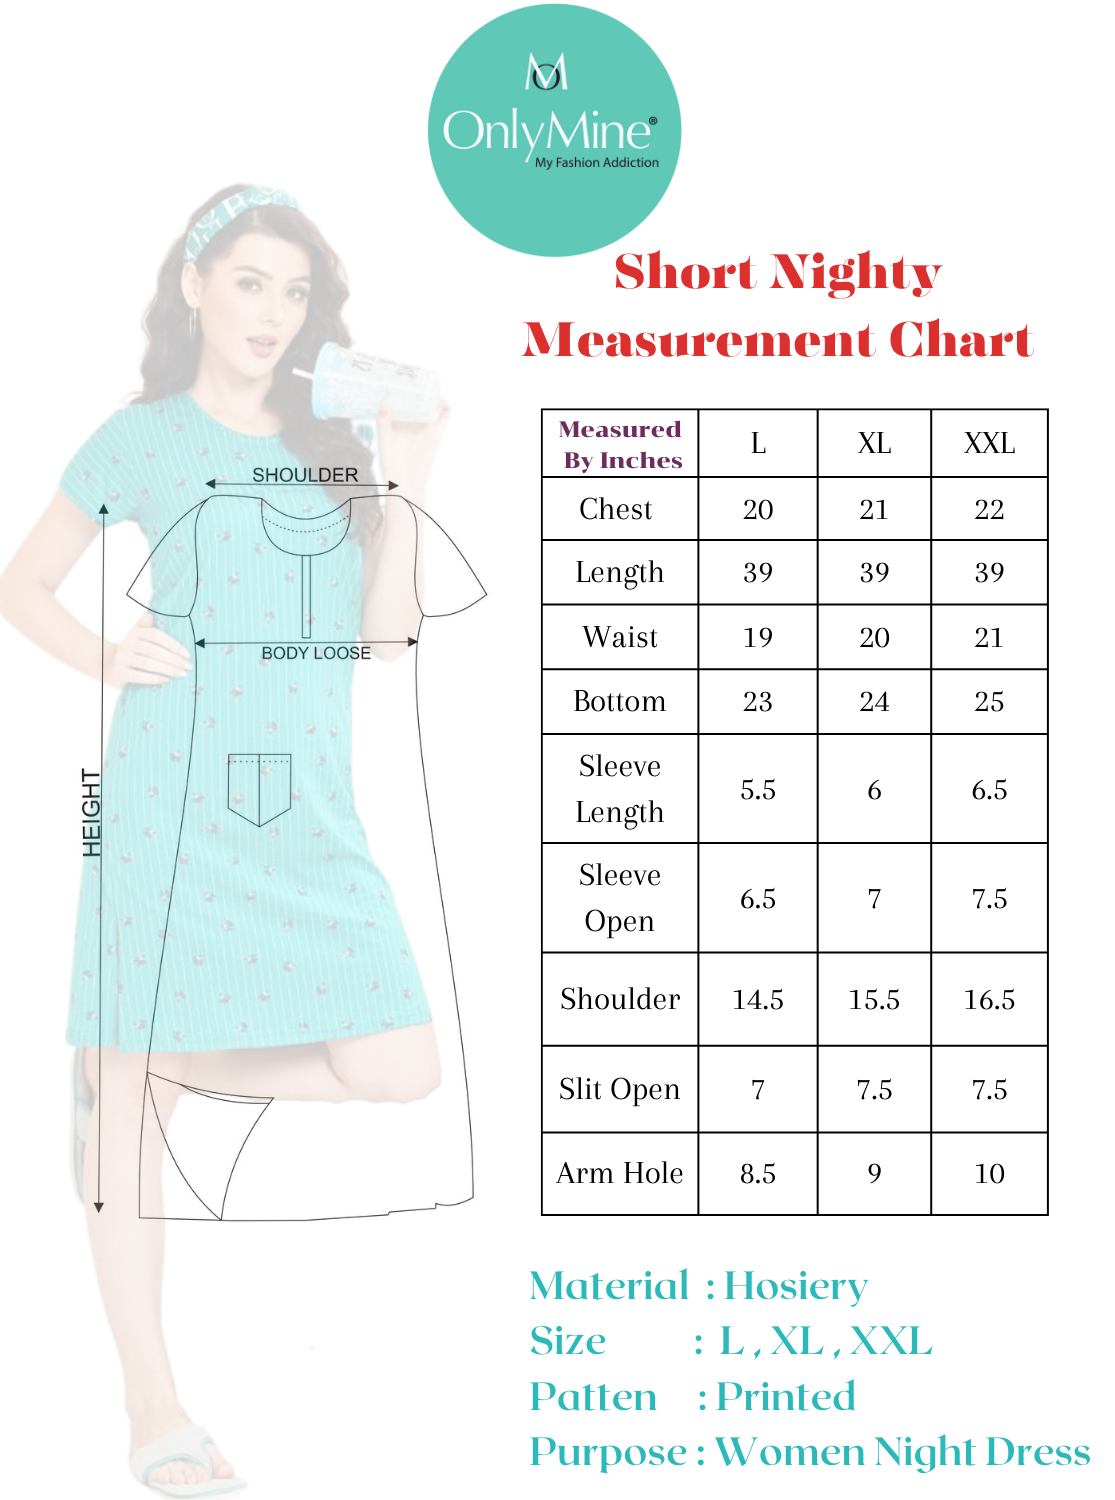 Newly Arrived ONLY MINE Premium HOSIERY Short Nighty | Ankle Length | Prettiest Collection's for Stylish Women's